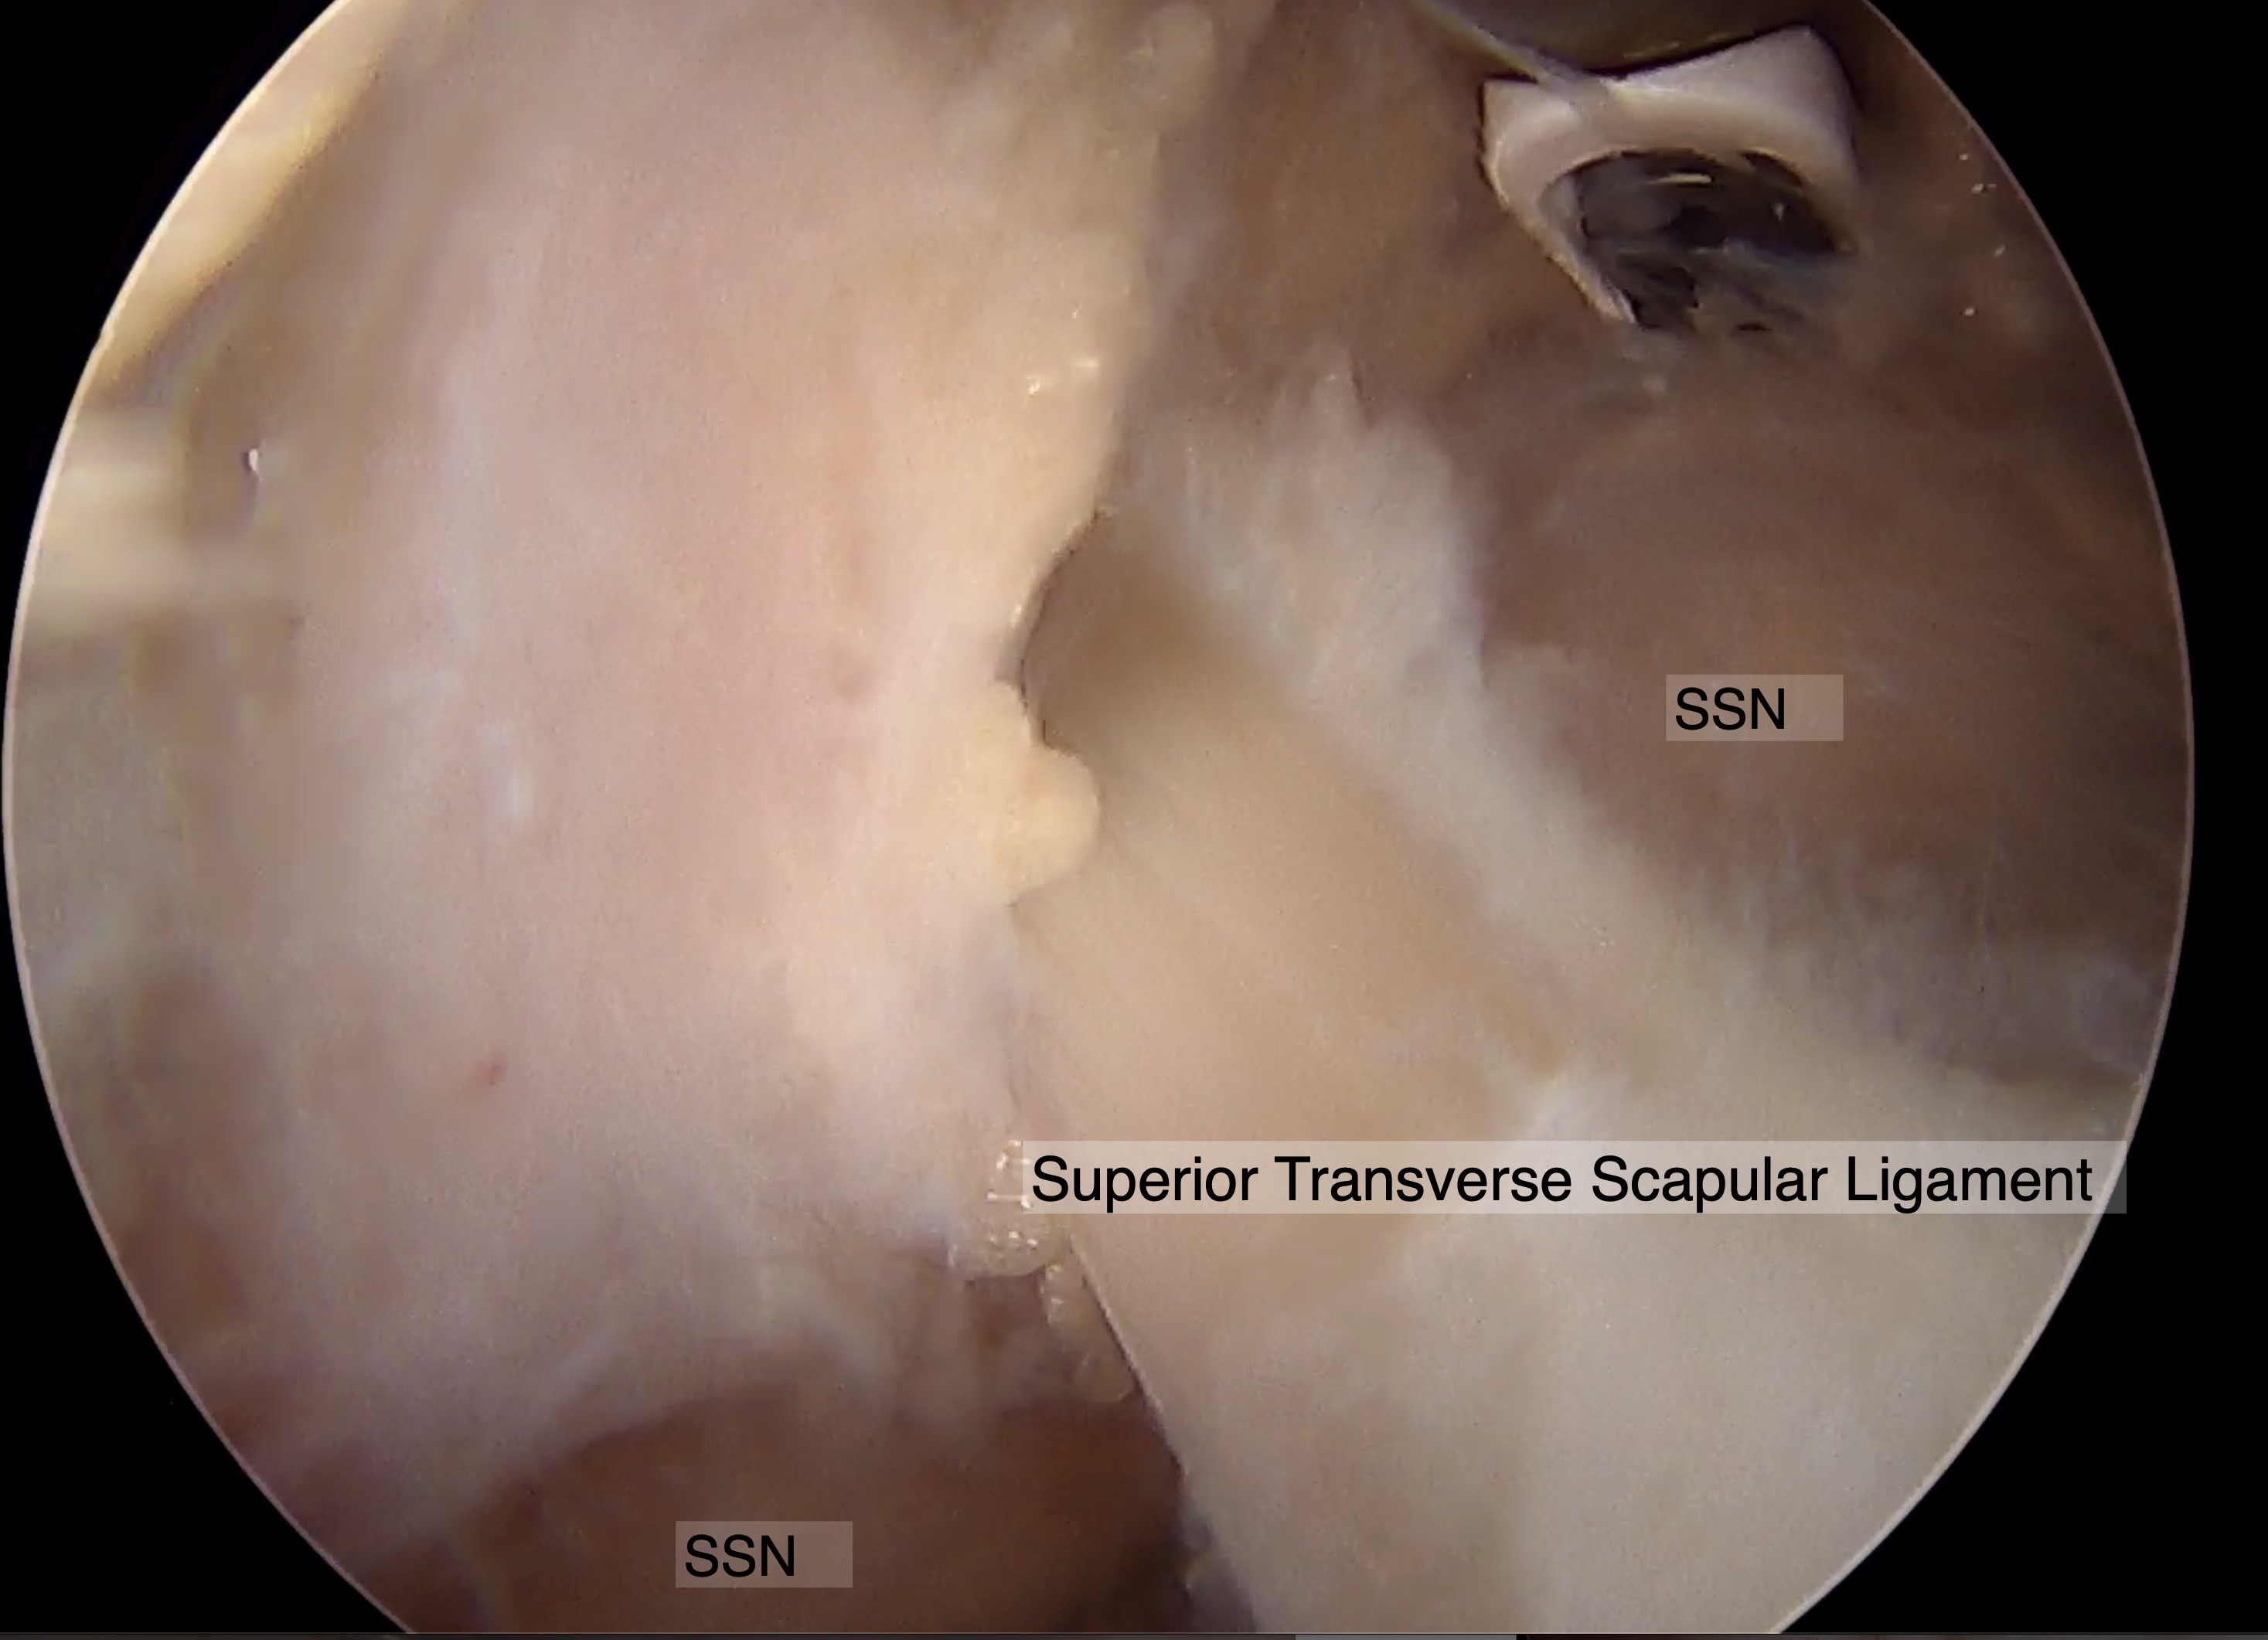 Arthroscopic image of demonstrating the Suprascapular nerve (SSN) coursing inferiorly to the Superior transverse scapular ligament (STSL).  The image demonstrates the SSN's course at the suprascapular notch